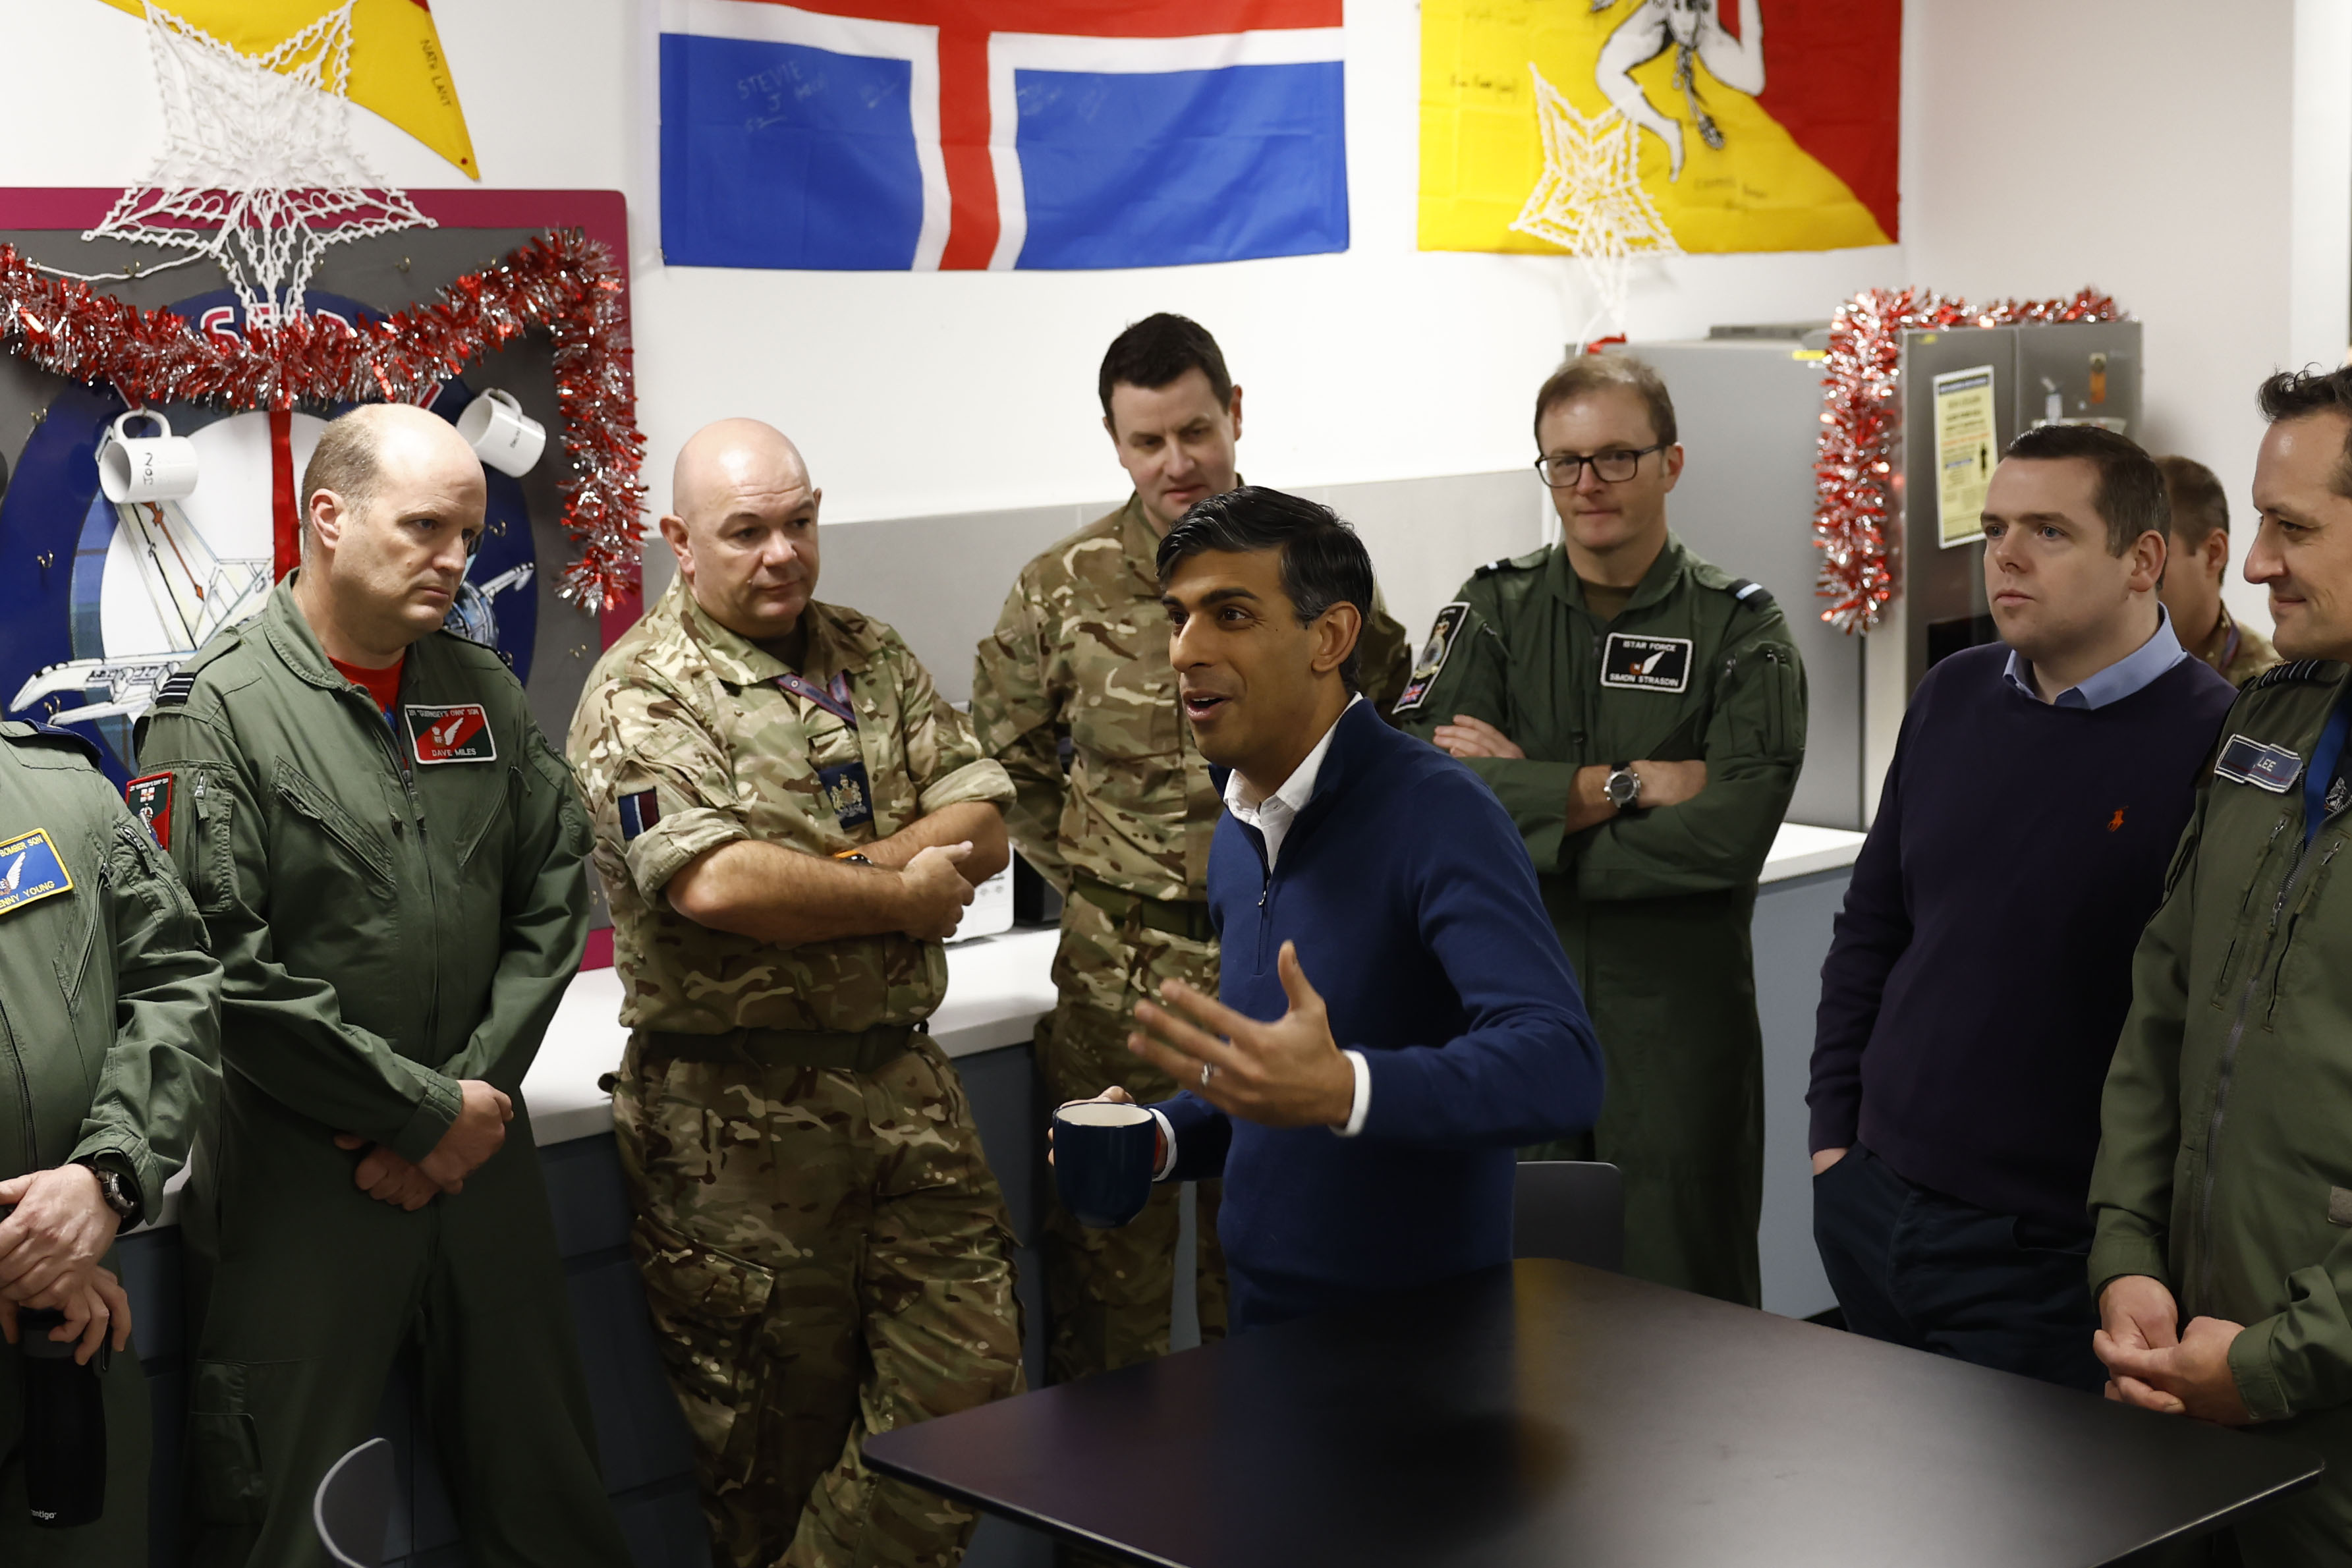 Prime Minister Rishi Sunak speaks to soldiers alongside Group captain Jim Lee (R) station commander and Scottish Conservative leader Douglas Ross (2ndR) at the RAF Lossiemouth in Moray.